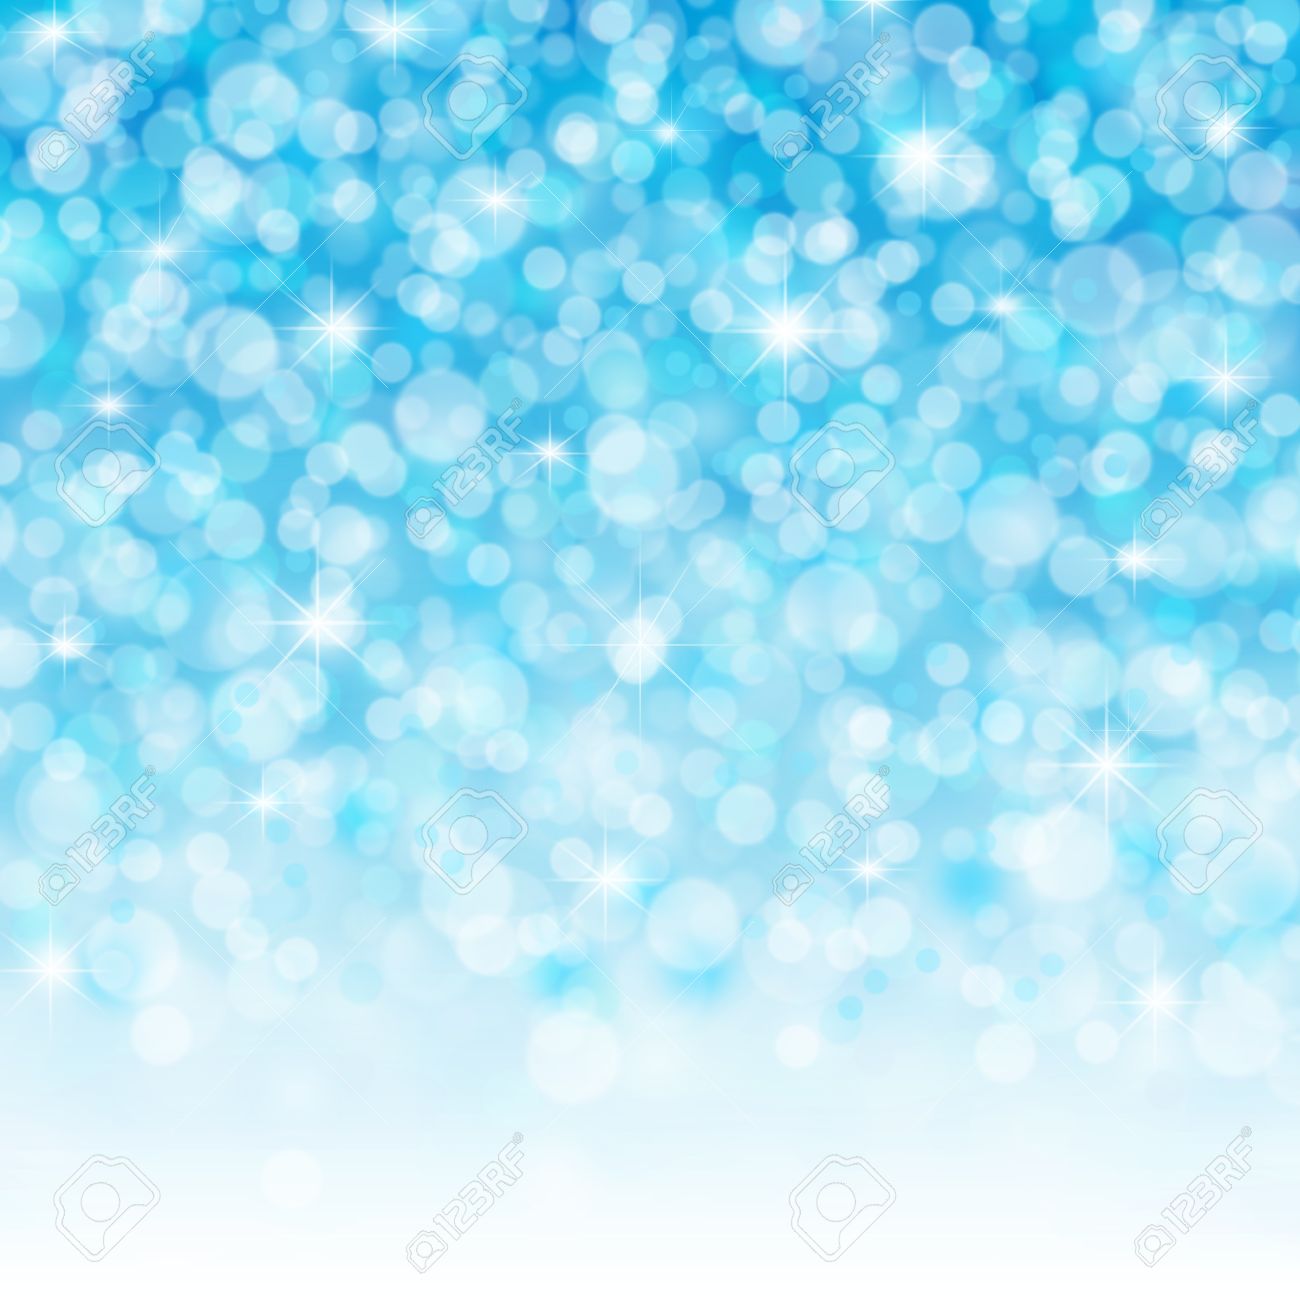 Cool Winter Background Design Stock Photo Picture And Royalty